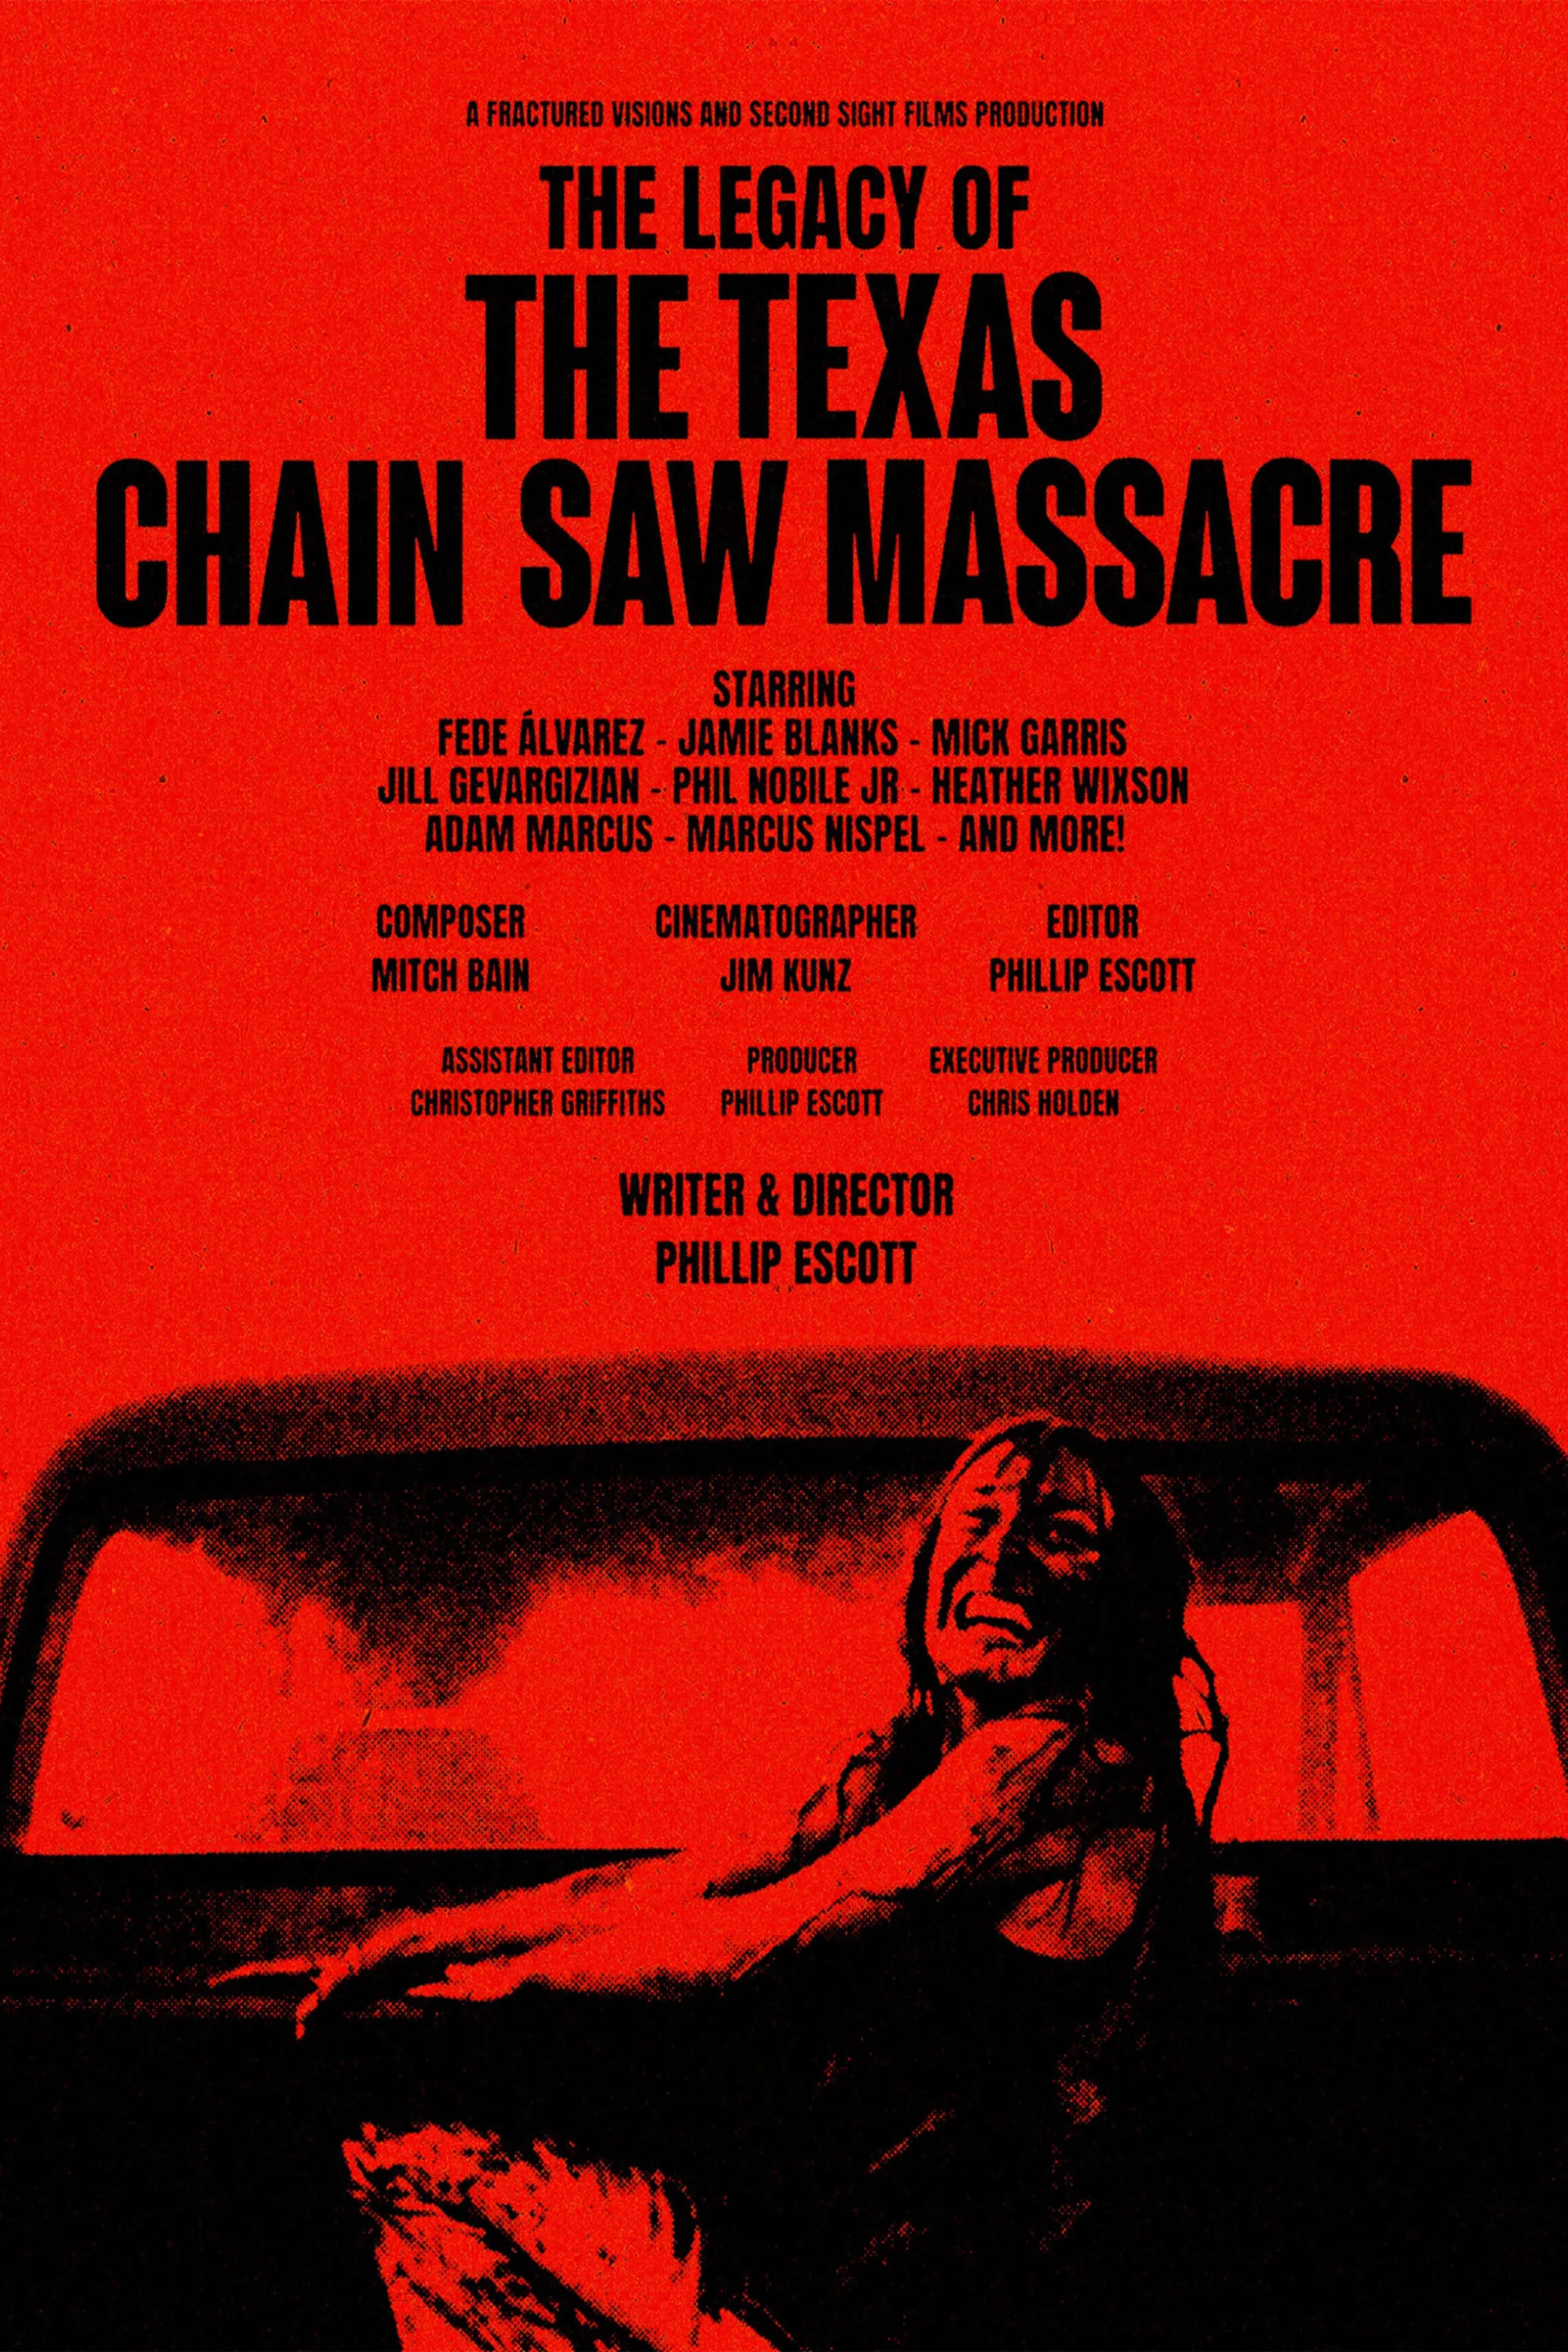 The Legacy of Texas Chain Saw Massacre Trailer & Poster